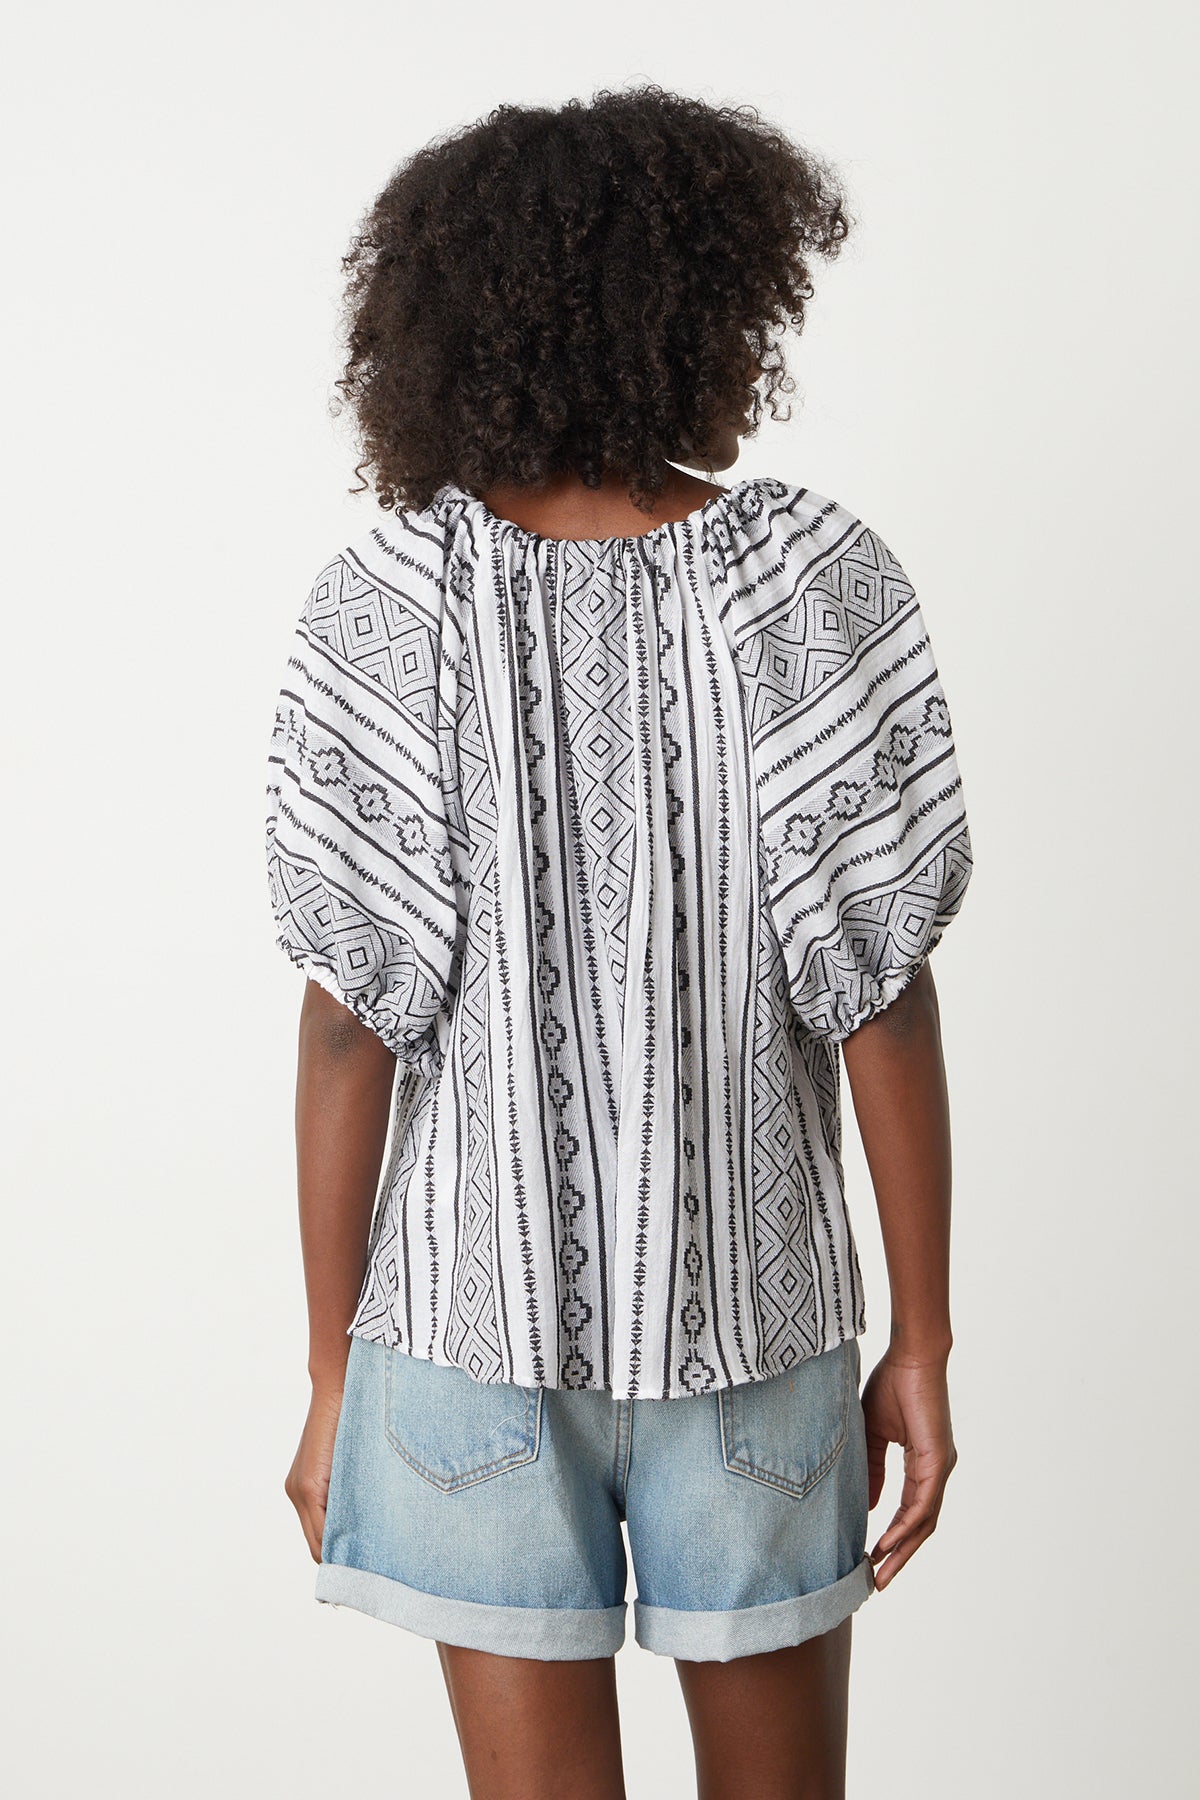 A woman wearing the Velvet by Graham & Spencer KIMMY JACQUARD BOHO TOP in white with a black and white pattern.-26296063885505